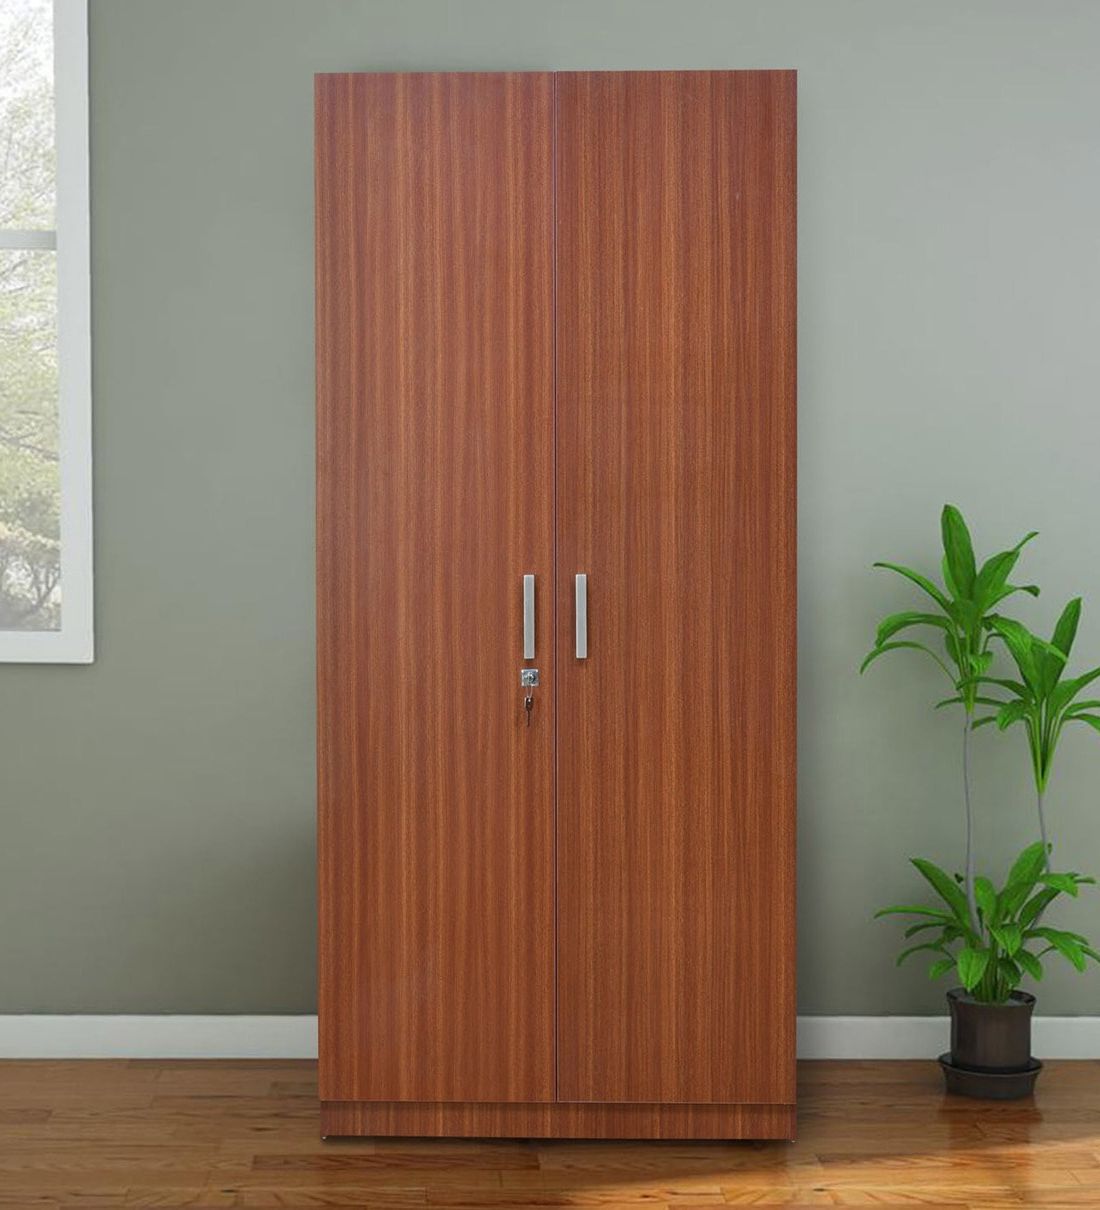 [%buy Amelia 2 Door Wardrobe In Espresso Colour At 64% Off@home |  Pepperfry Within Well Known Espresso Wardrobes|espresso Wardrobes Inside Most Up To Date Buy Amelia 2 Door Wardrobe In Espresso Colour At 64% Off@home |  Pepperfry|most Recent Espresso Wardrobes With Regard To Buy Amelia 2 Door Wardrobe In Espresso Colour At 64% Off@home |  Pepperfry|well Liked Buy Amelia 2 Door Wardrobe In Espresso Colour At 64% Off@home |  Pepperfry In Espresso Wardrobes%] (Photo 9 of 10)